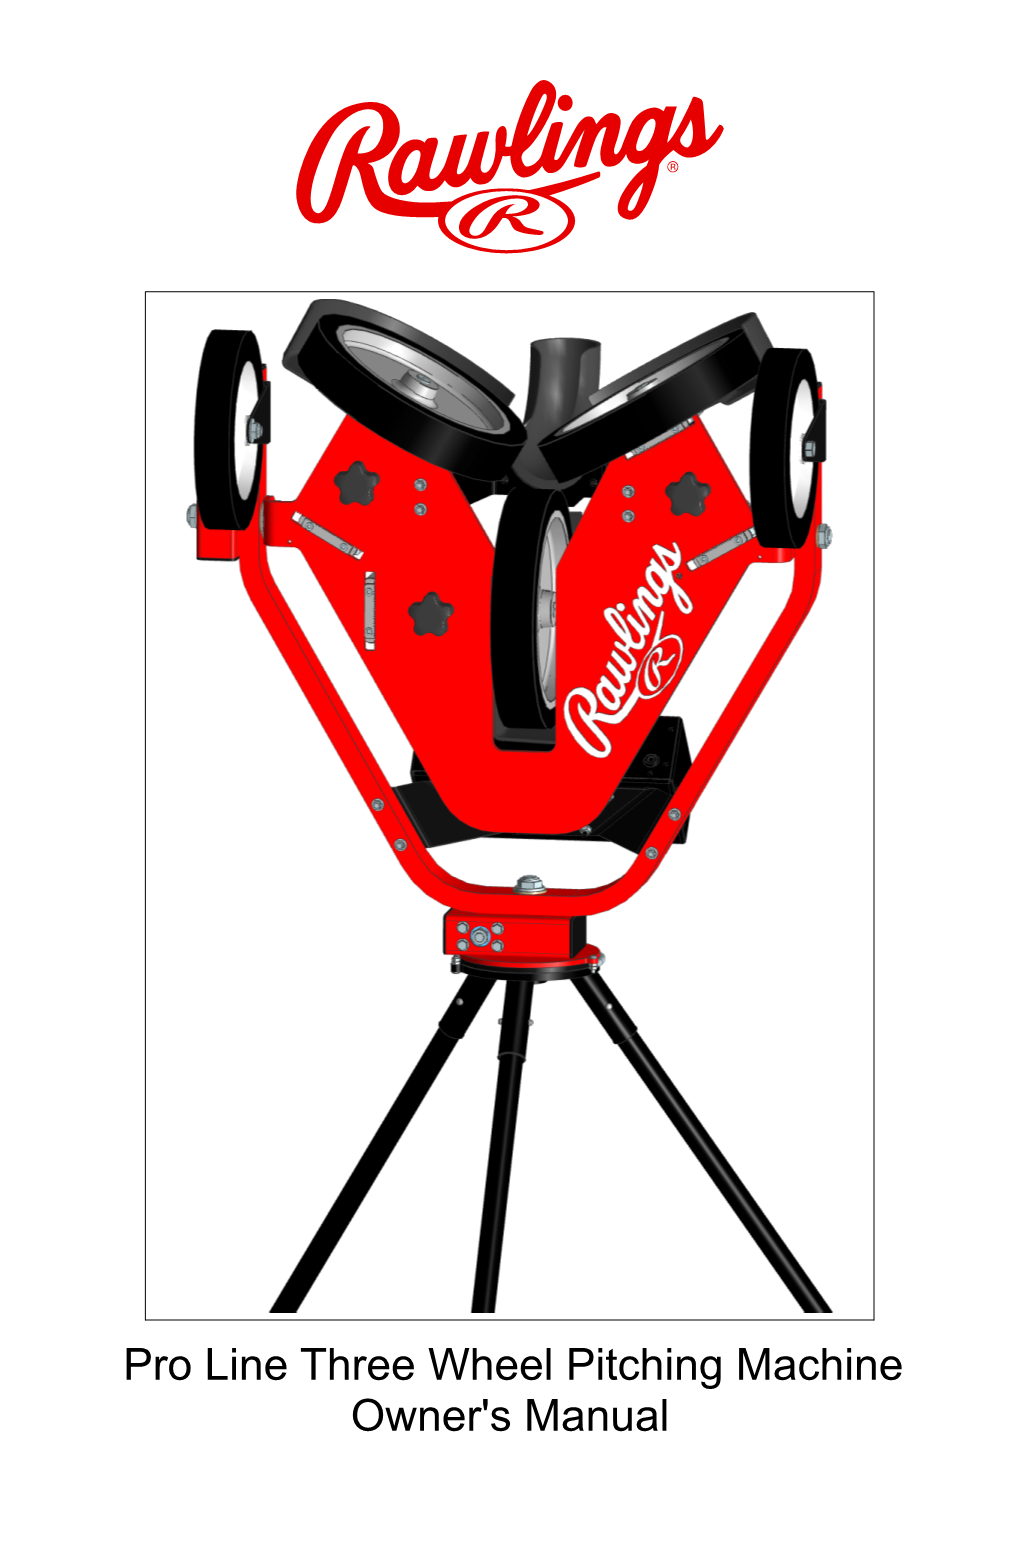 Pro Line Three Wheel Pitching Machine Owner's Manual CAUTIONS ● This Machine Is Not a Toy! Use Under Adult Supervision Only